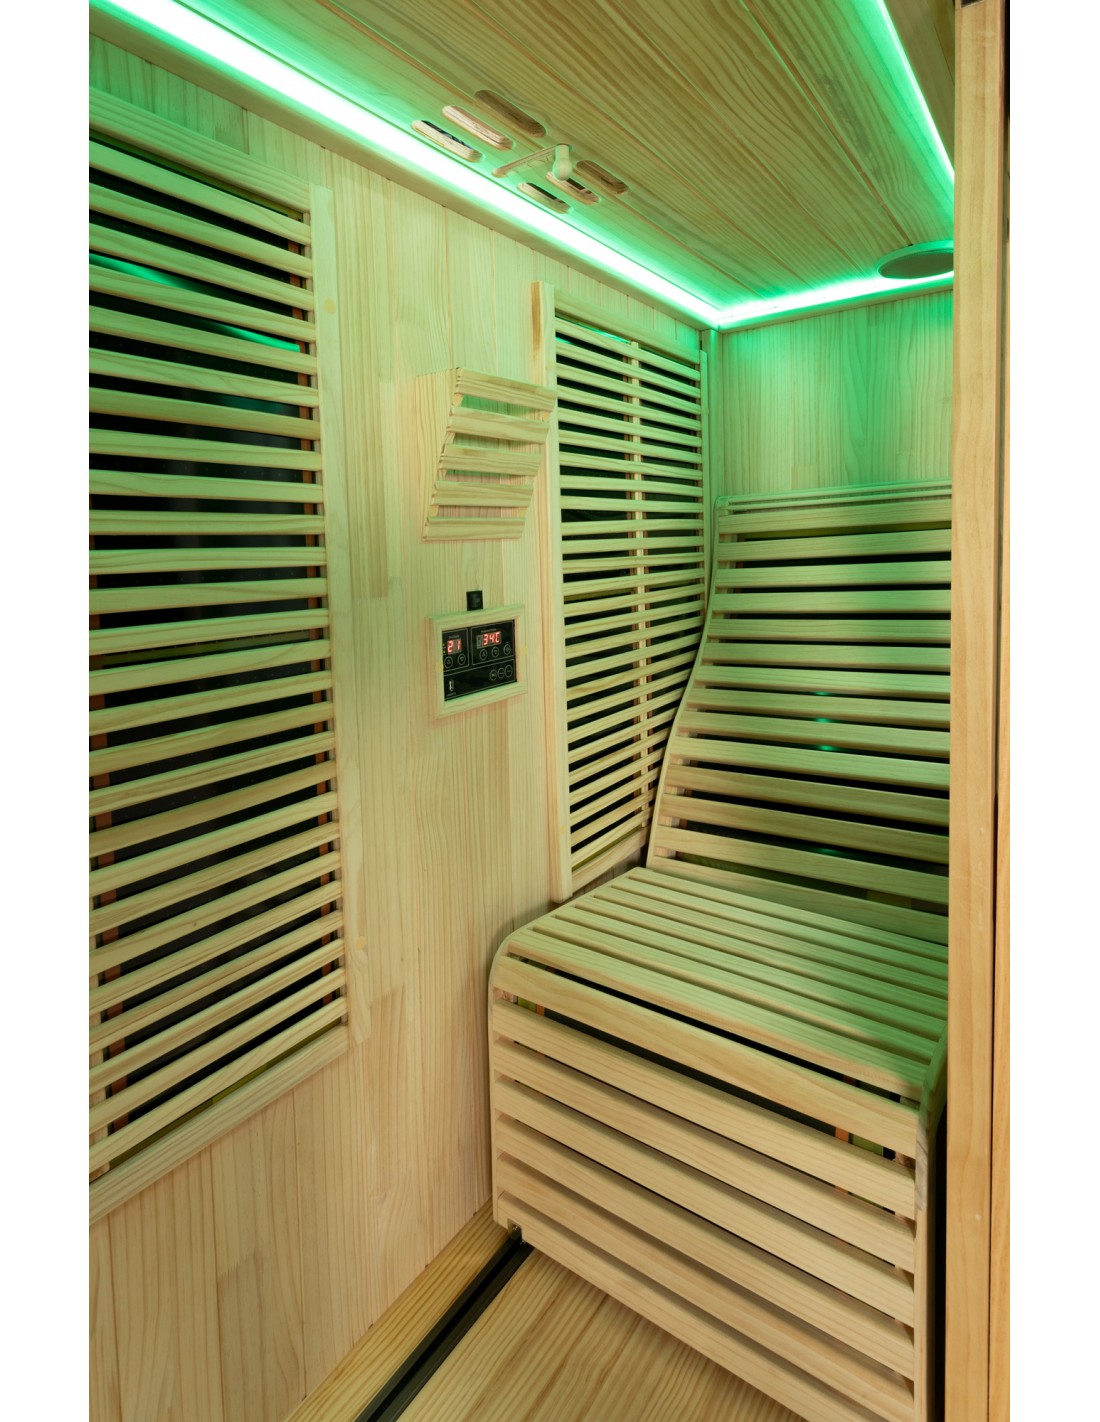 Dharani S1 Plus - 1 Person Infrared Sauna With Reclining Chair